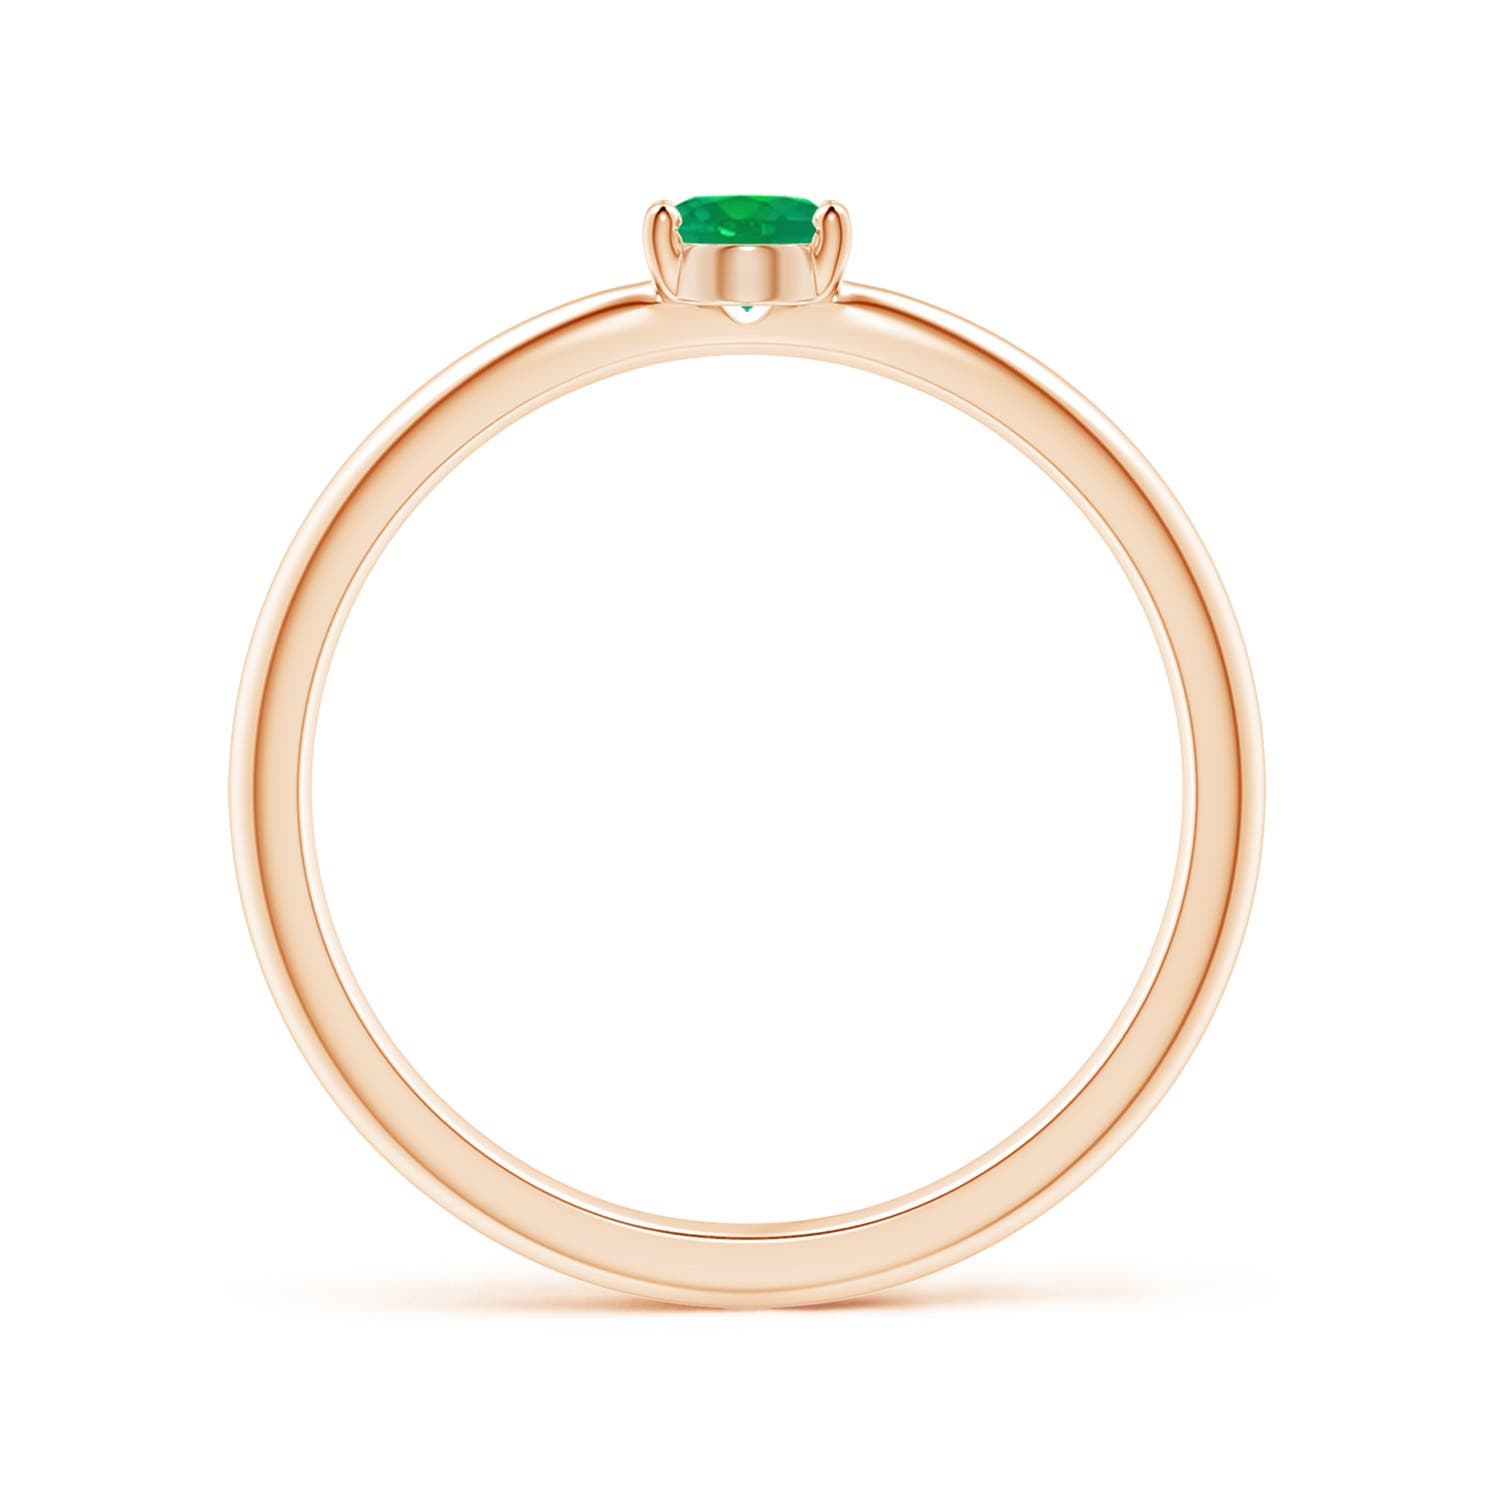 AA - Emerald / 0.3 CT / 14 KT Rose Gold